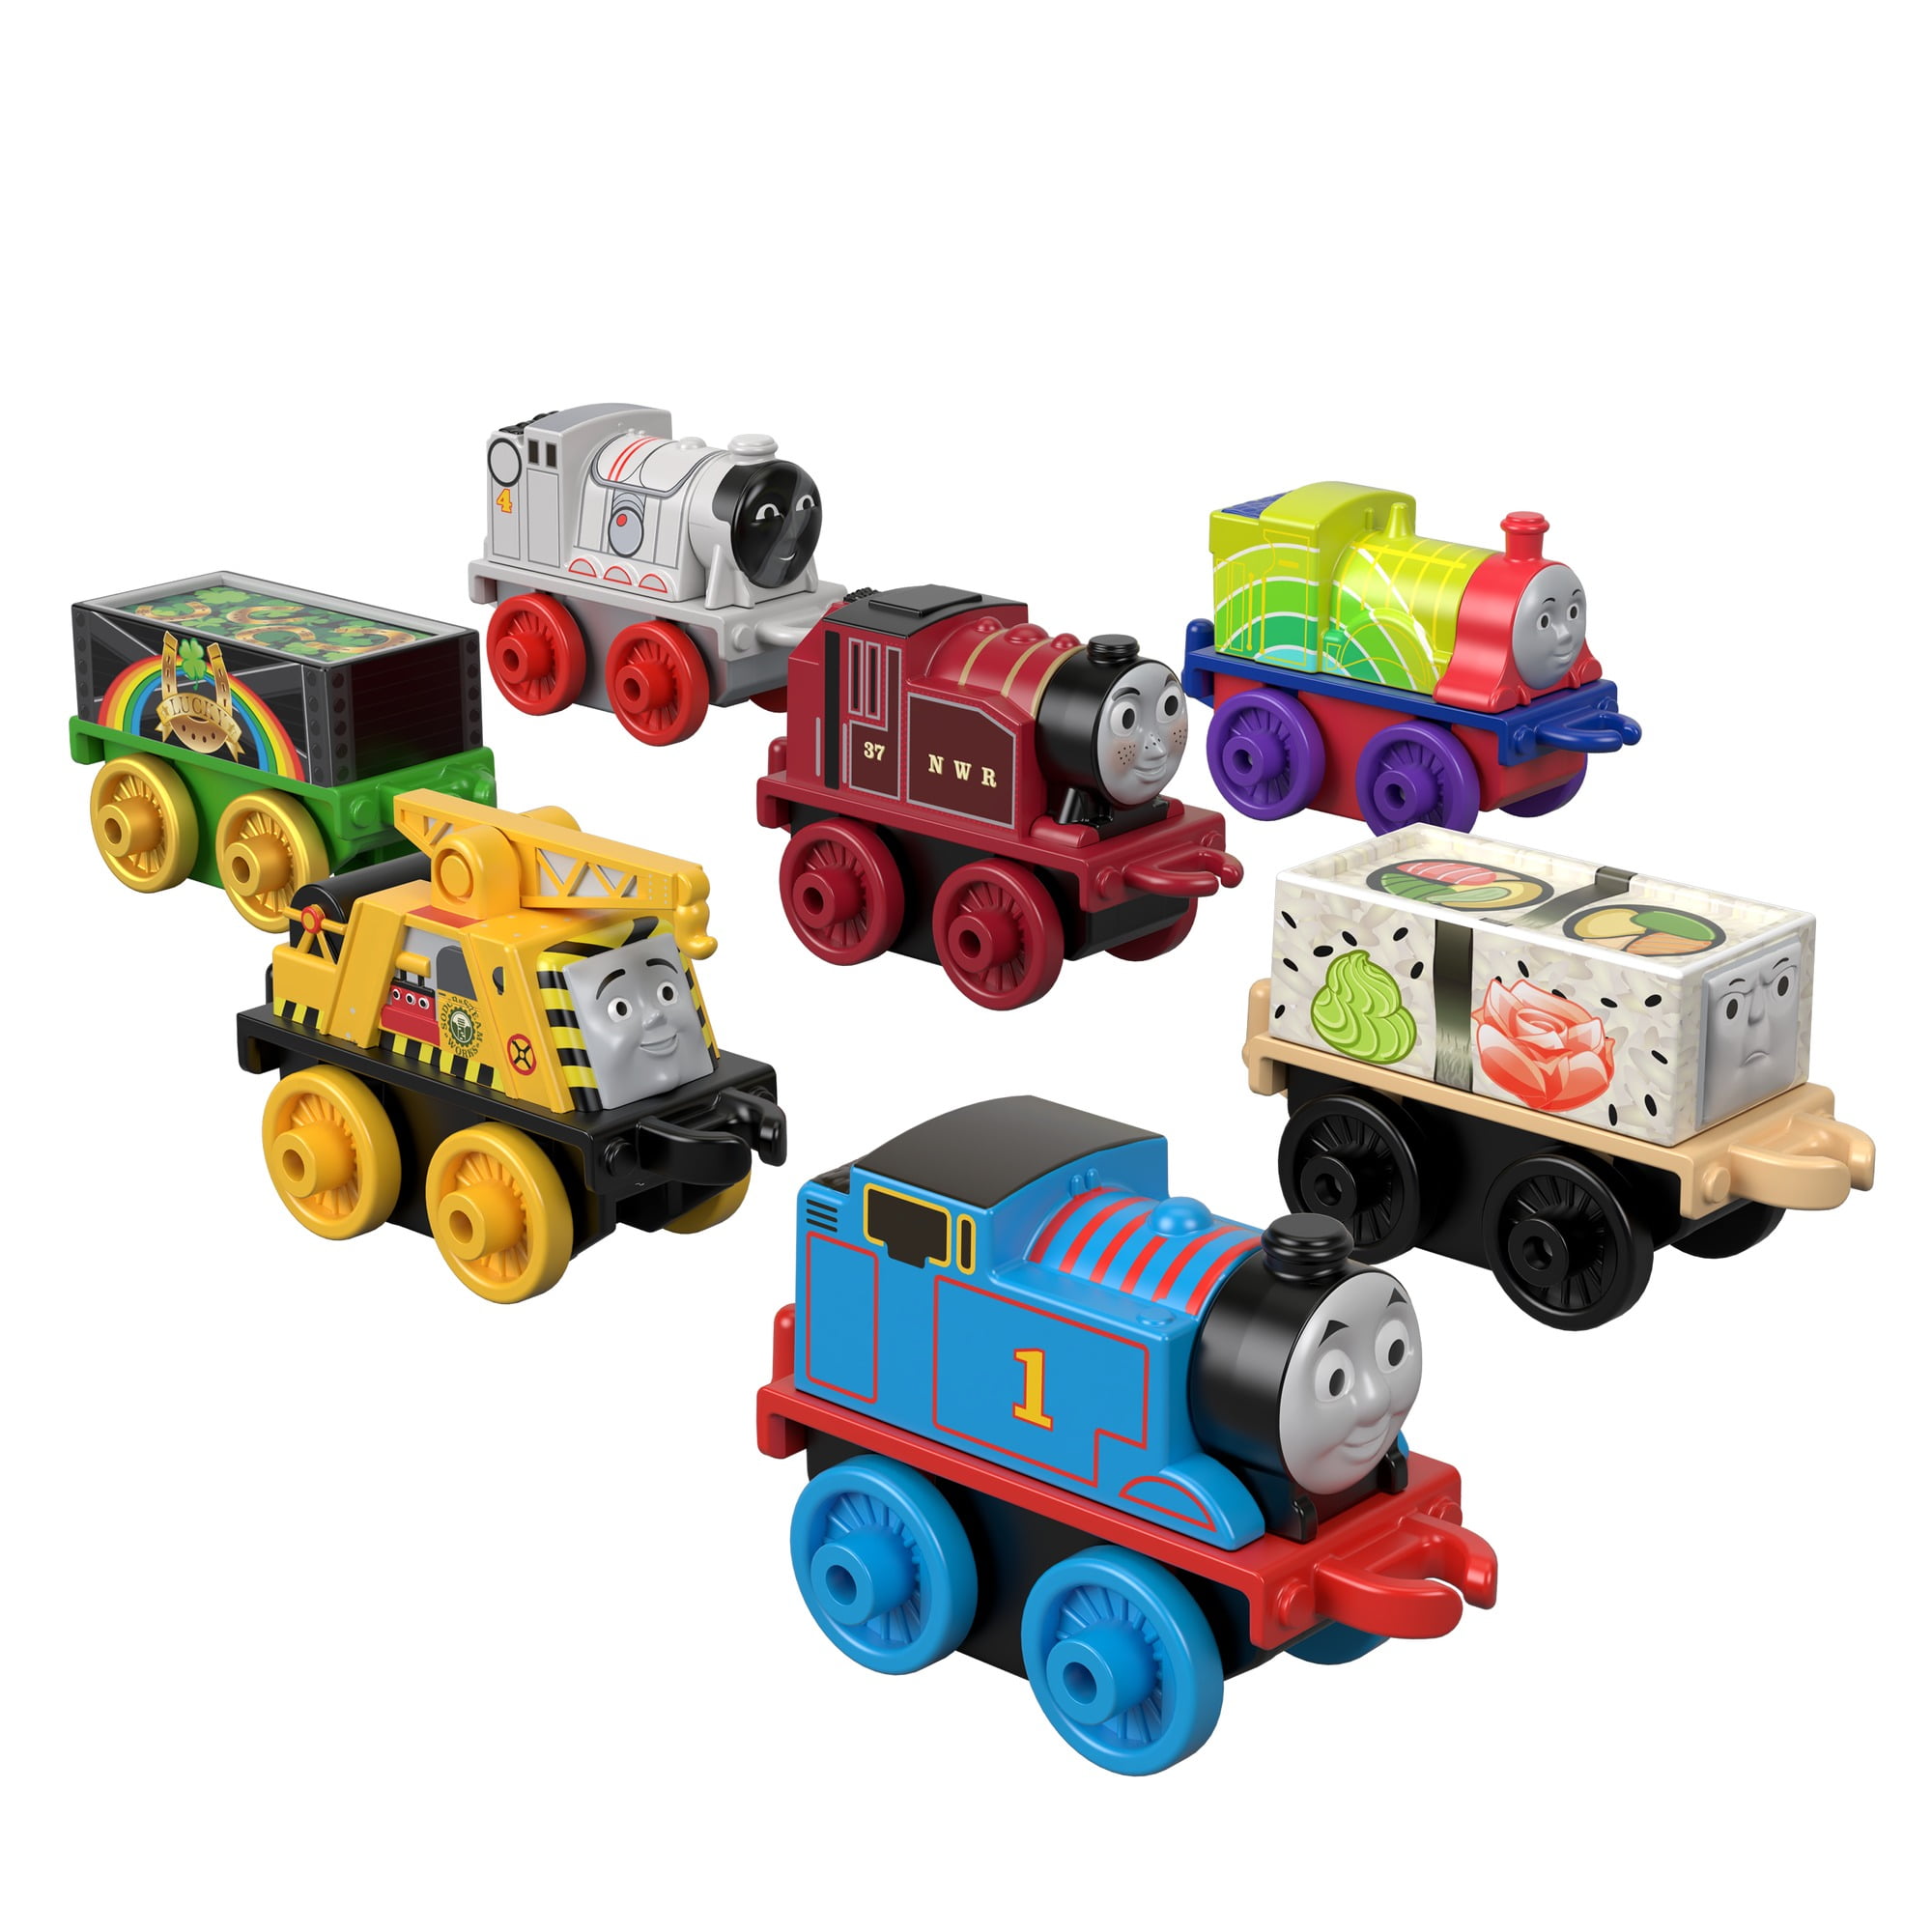 New In Box Thomas and Friends Minis 7 Pack